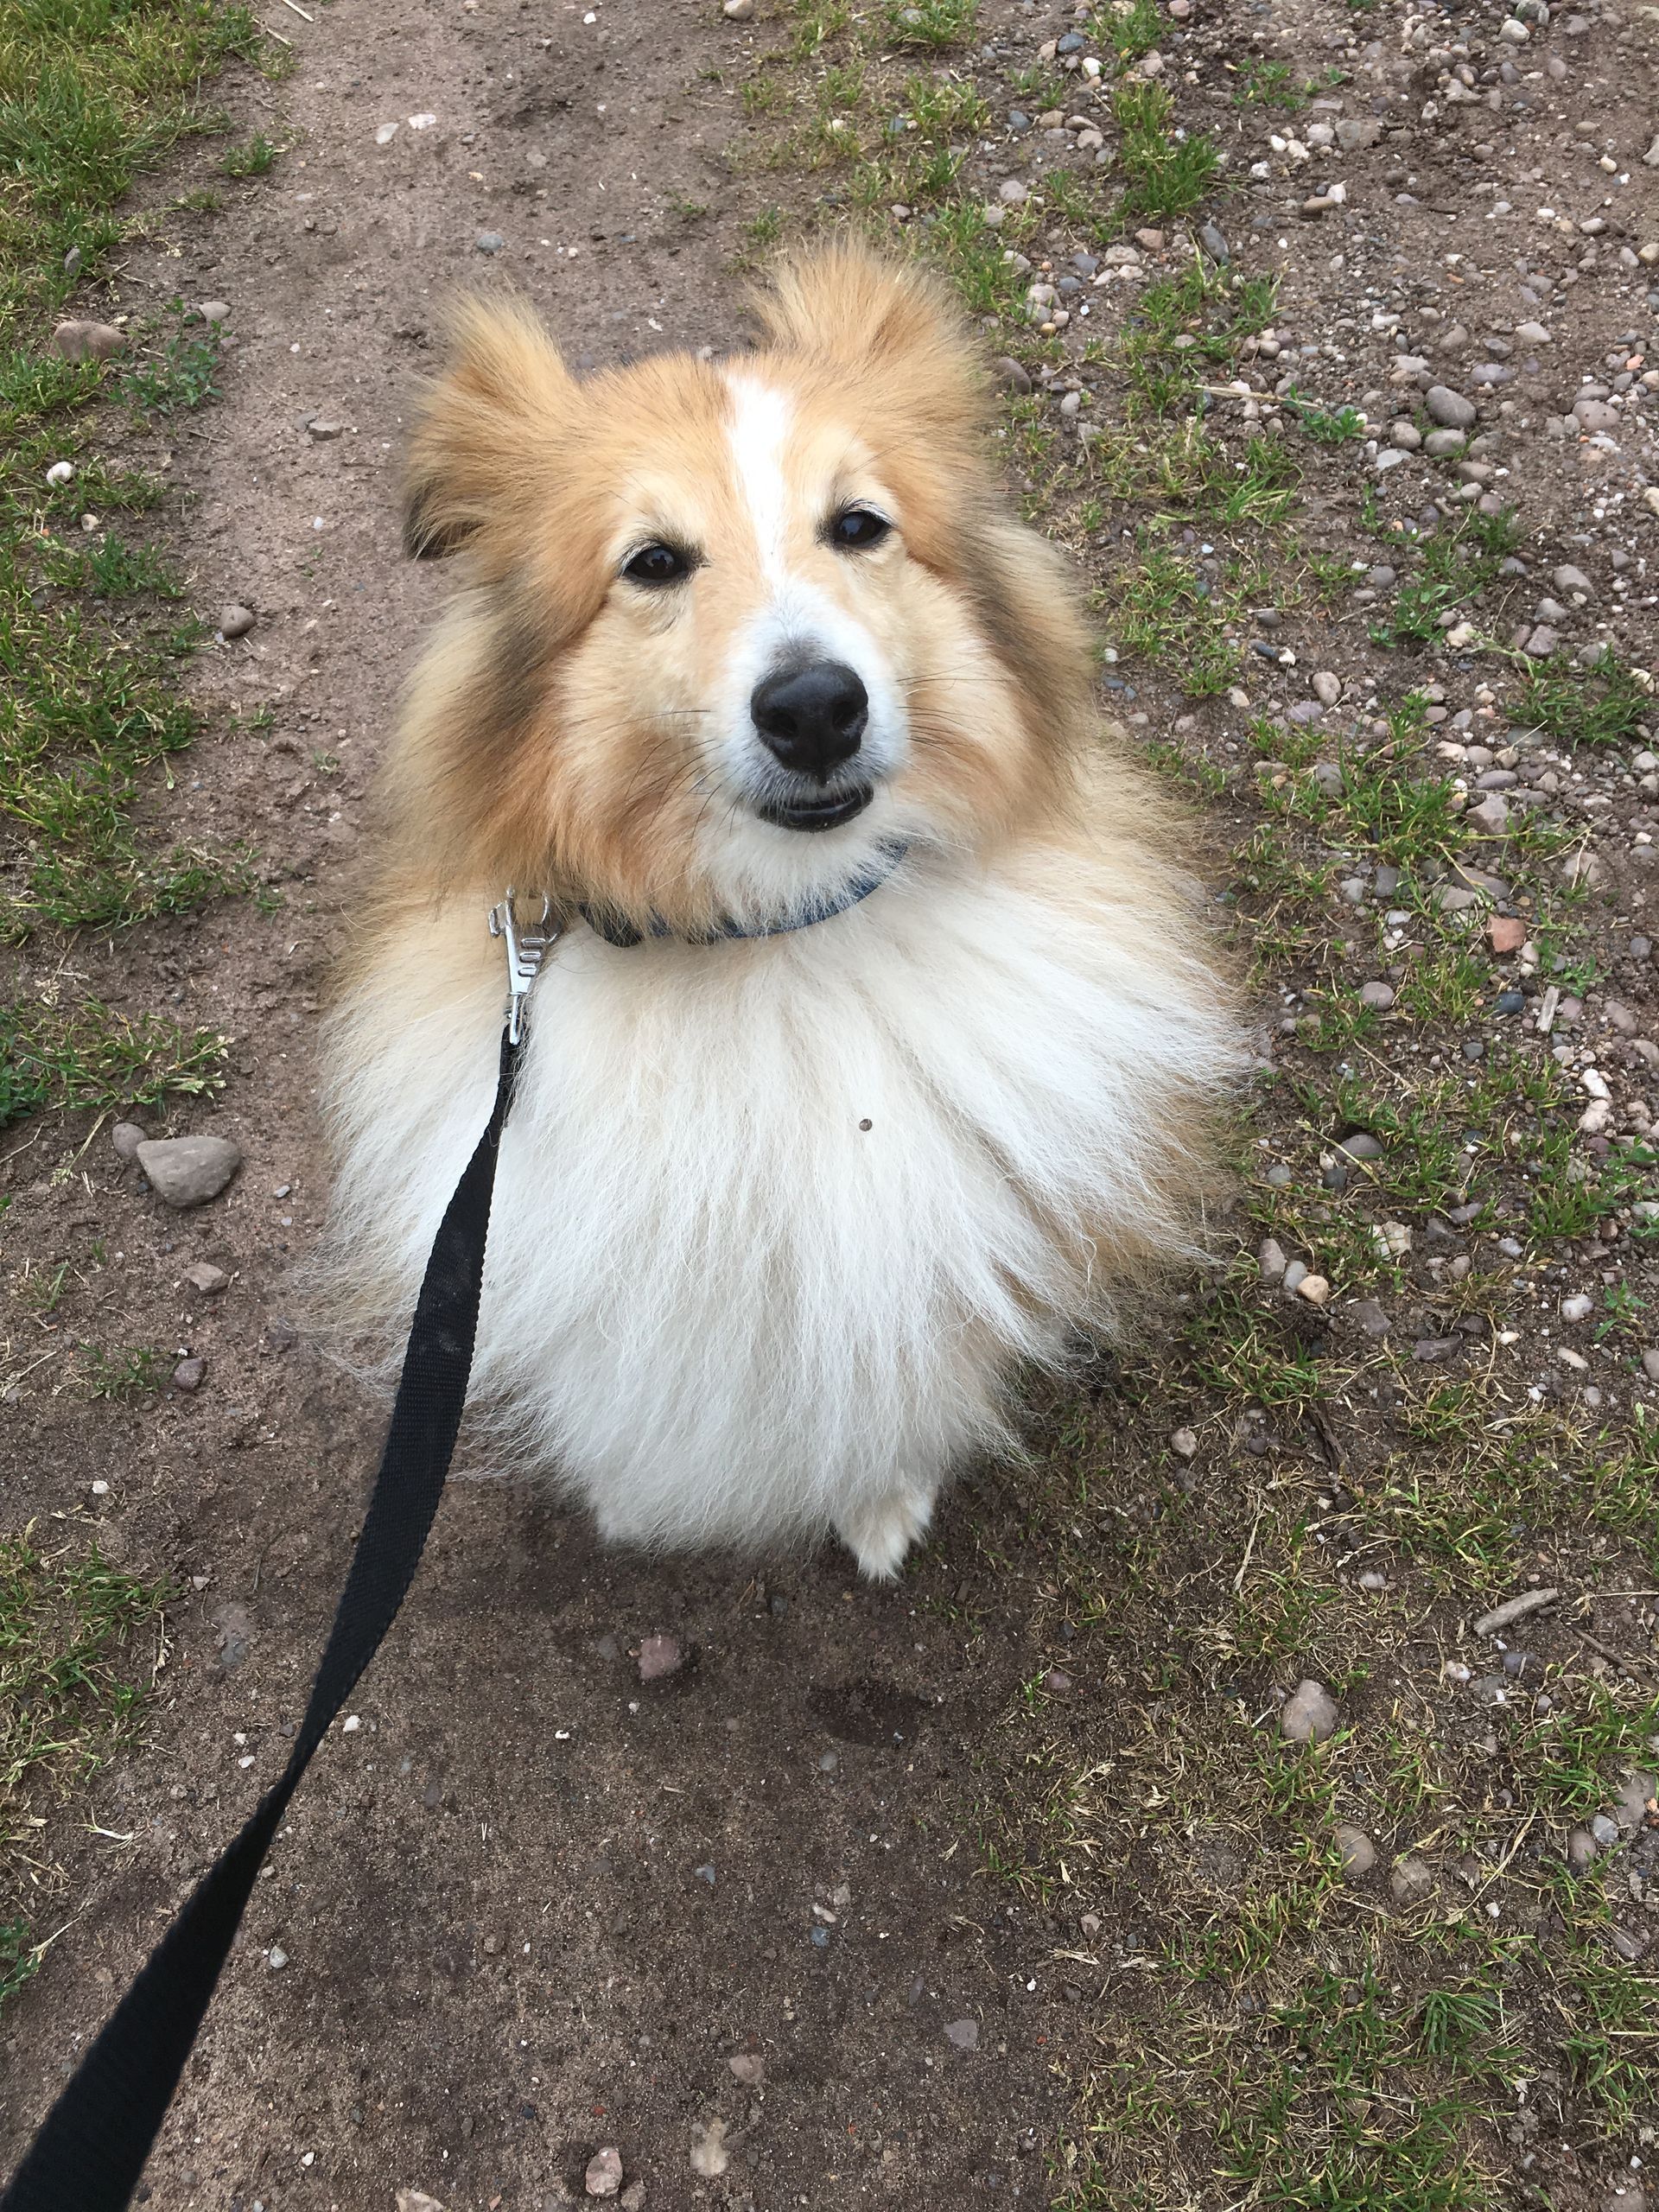 Dog walking and home visits in ridgeway, sheffield s12 area - rough collie on a lead, for a walk in a field with als creatures great and small